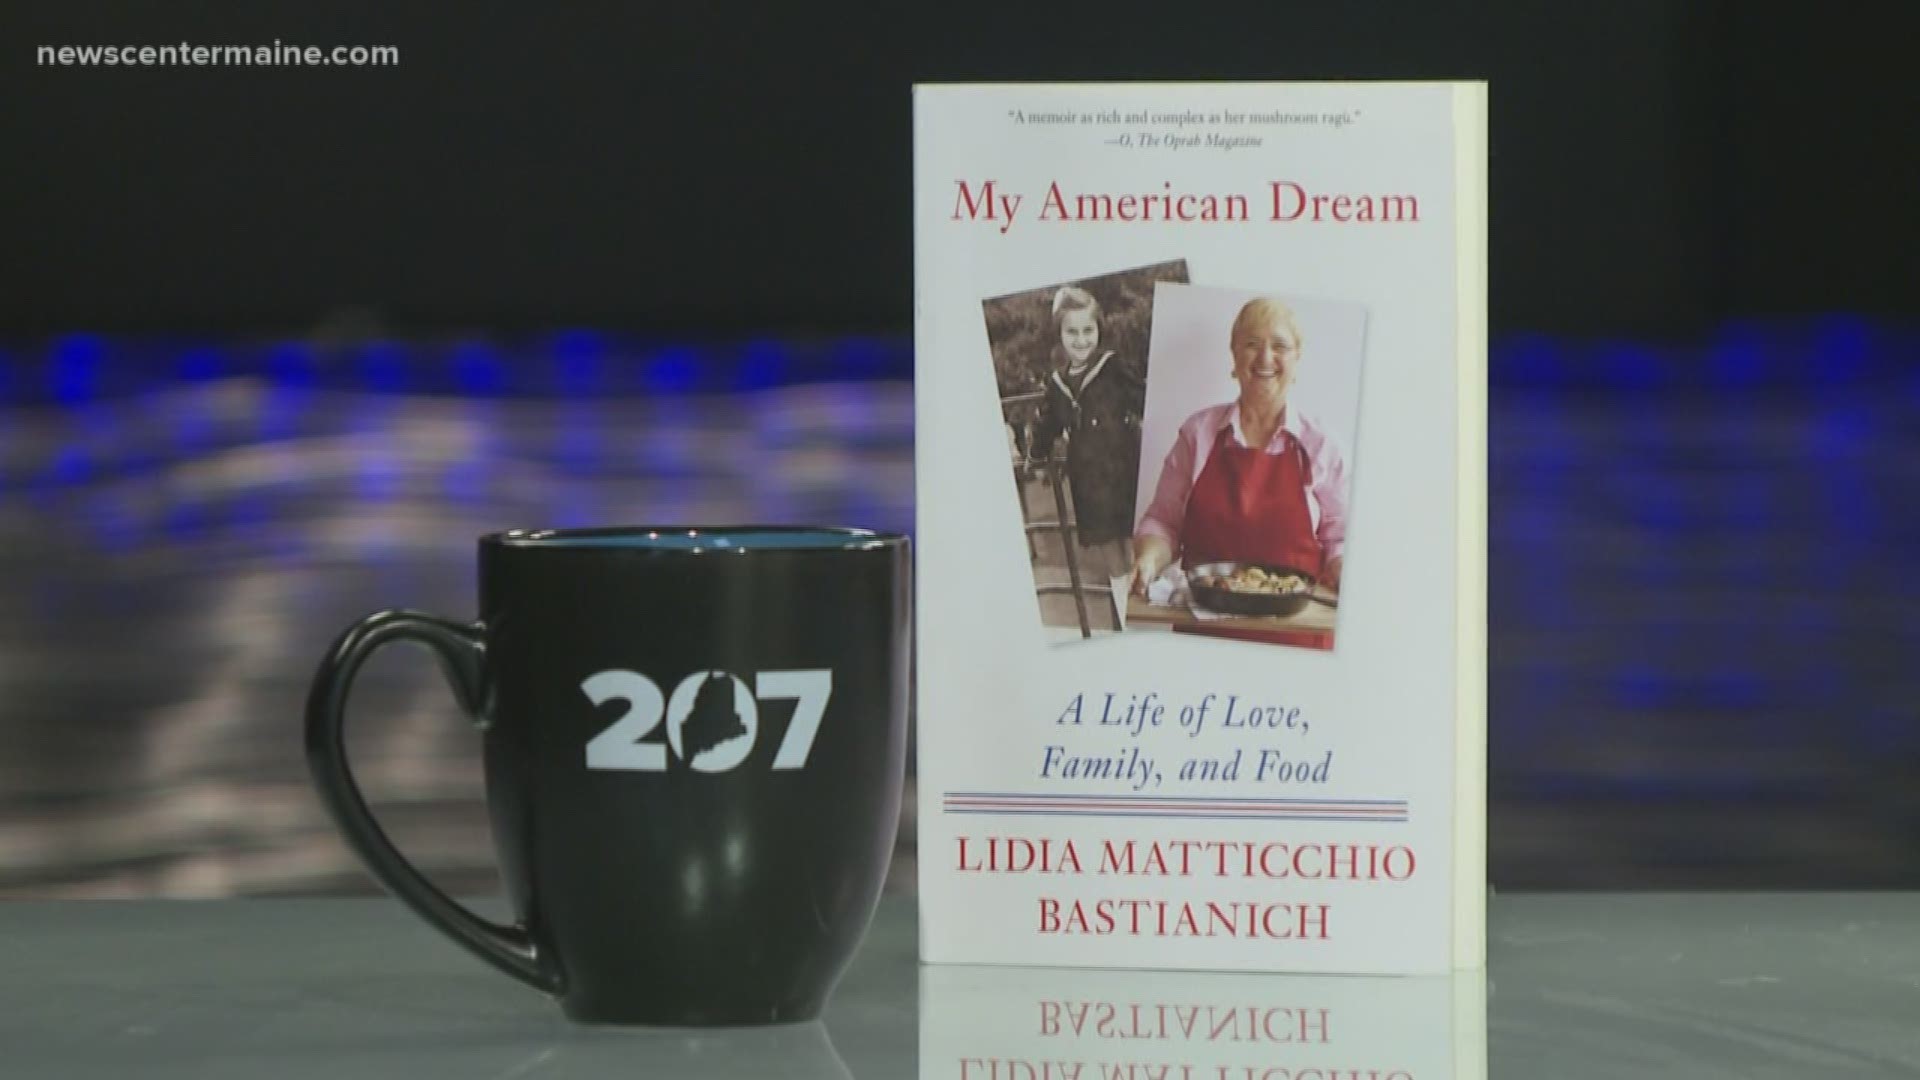 Television chef Lidia Bastianich tells her story in her memoir, "My American Dream: A Life of Love, Family, and Food."